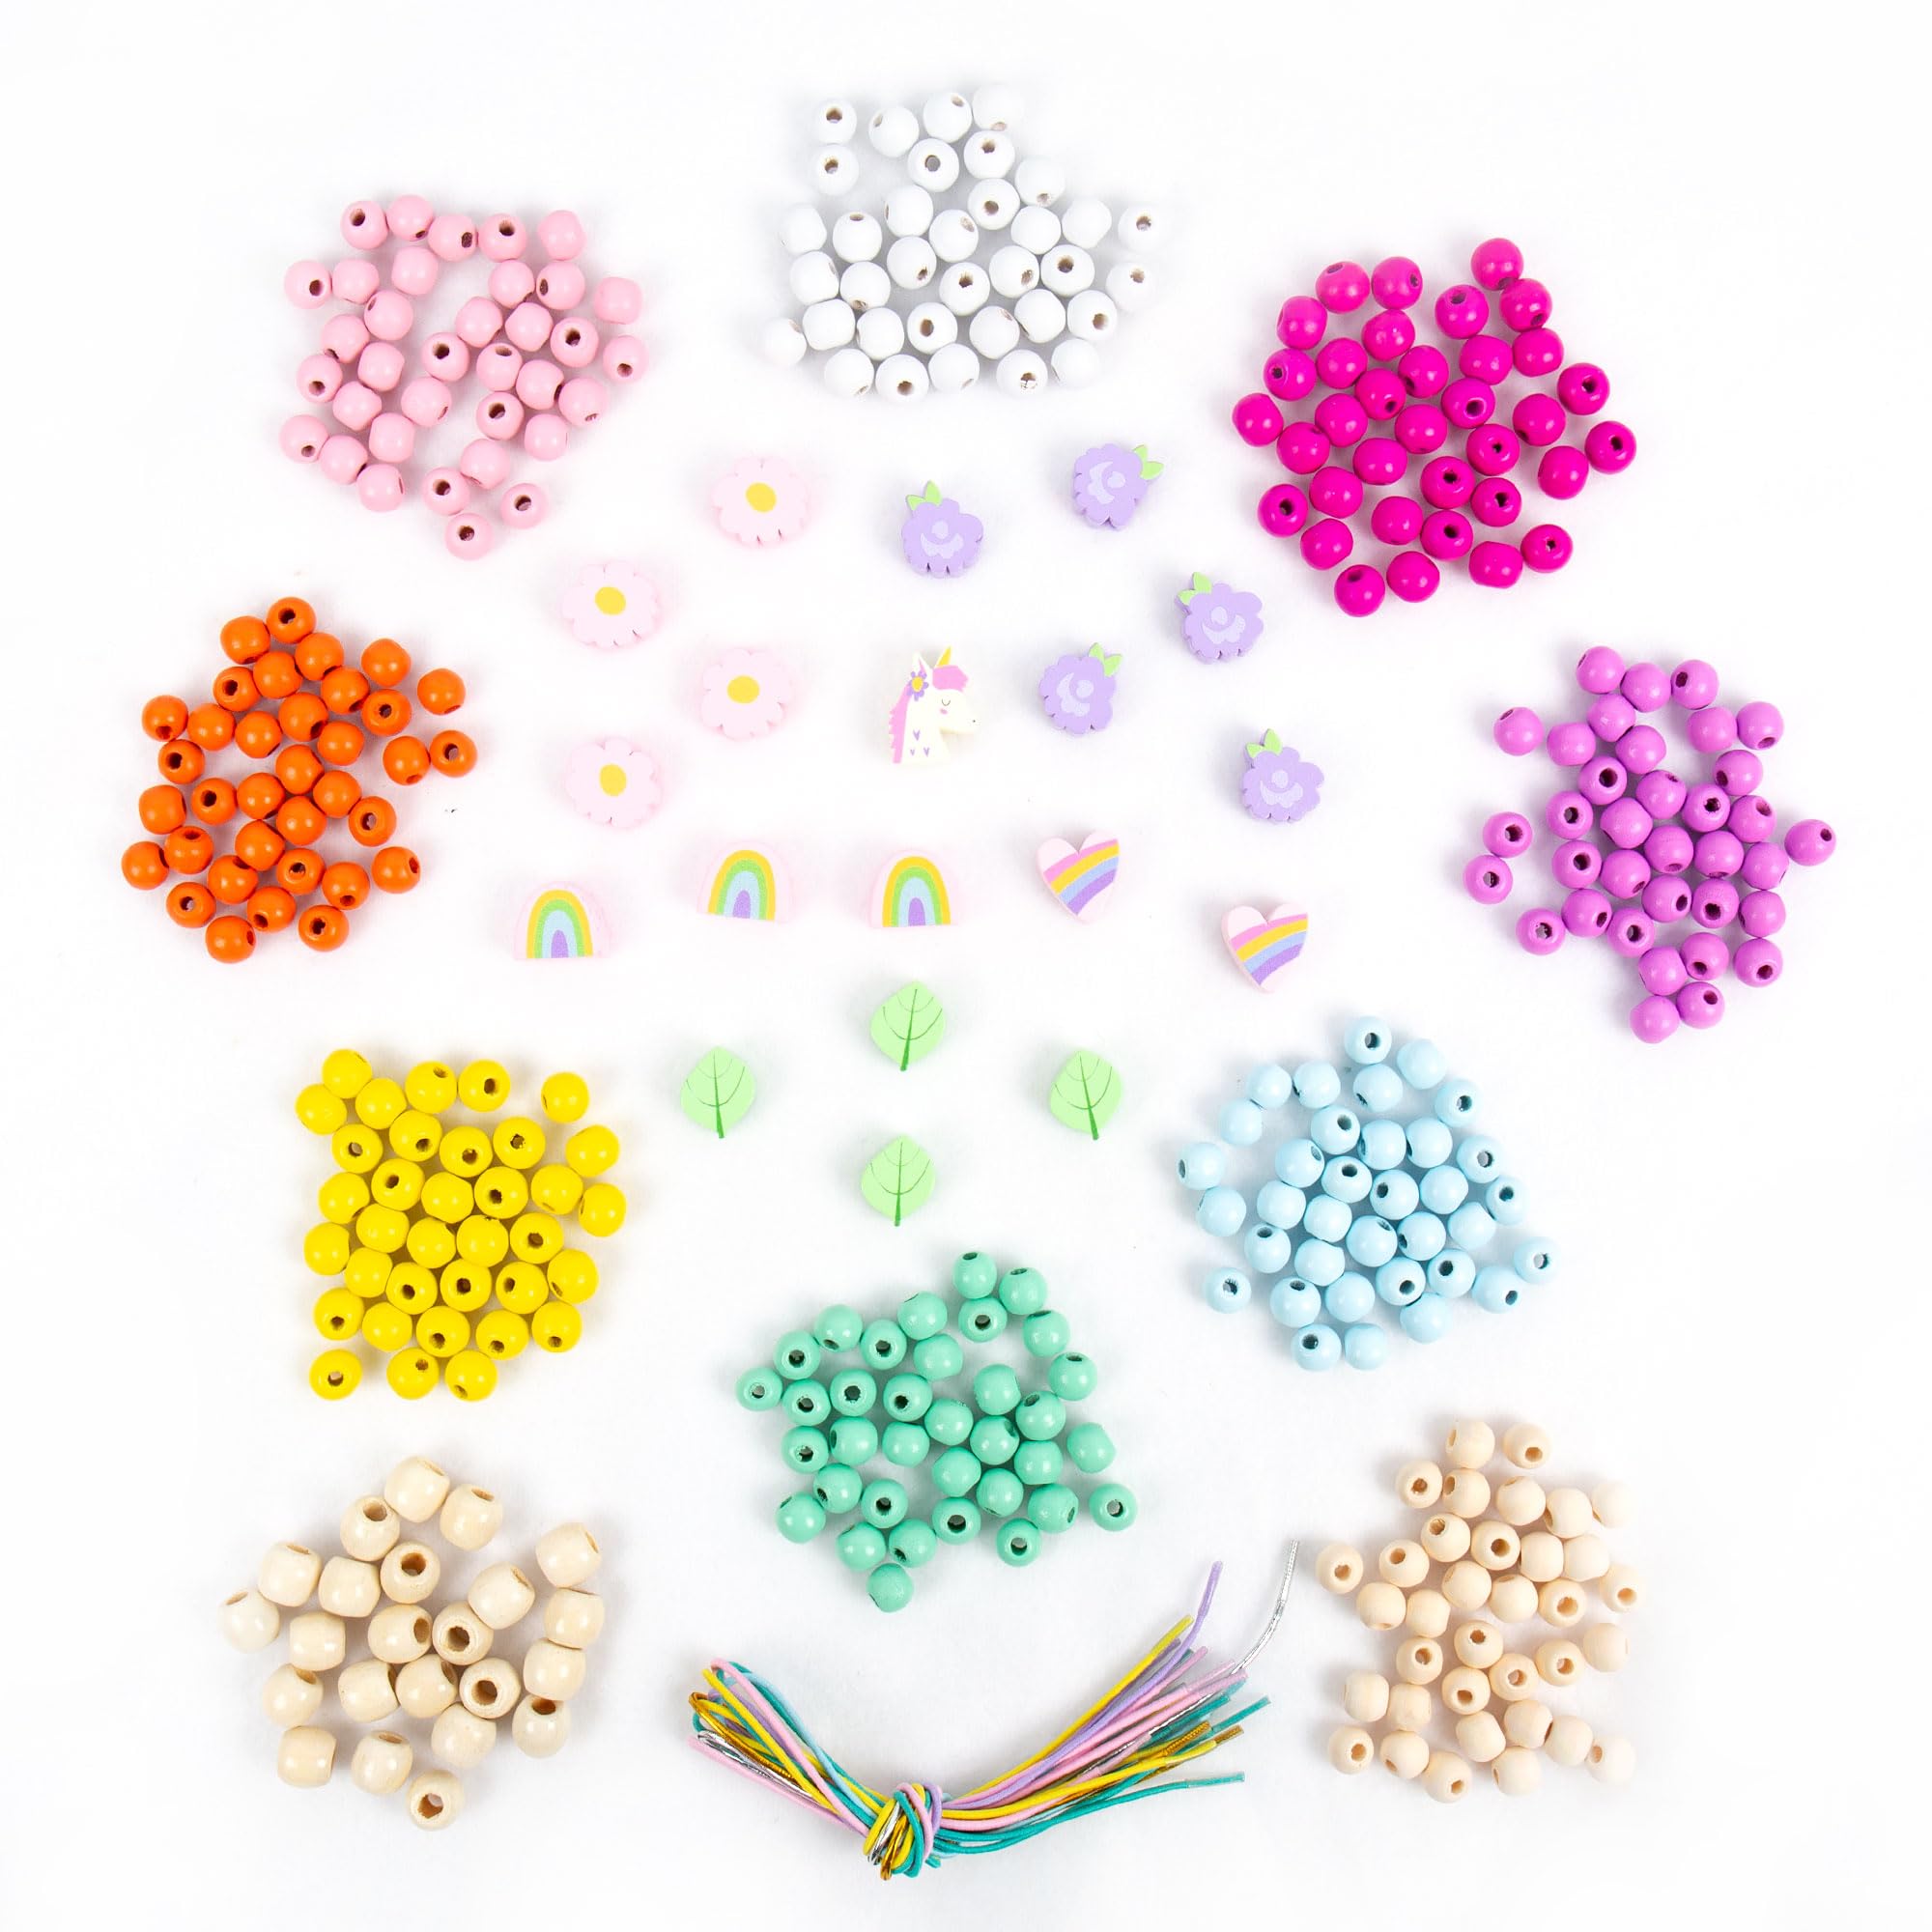 Story Magic Wooden Flower Bead Set, Over 300 Large Hole Wood Beads & Charms for Beading Bracelets, Bracelet Making Kit, Flower Bracelet Kit, Whimsical Bracelet Charms, Storage Tray Included, Ages 4+